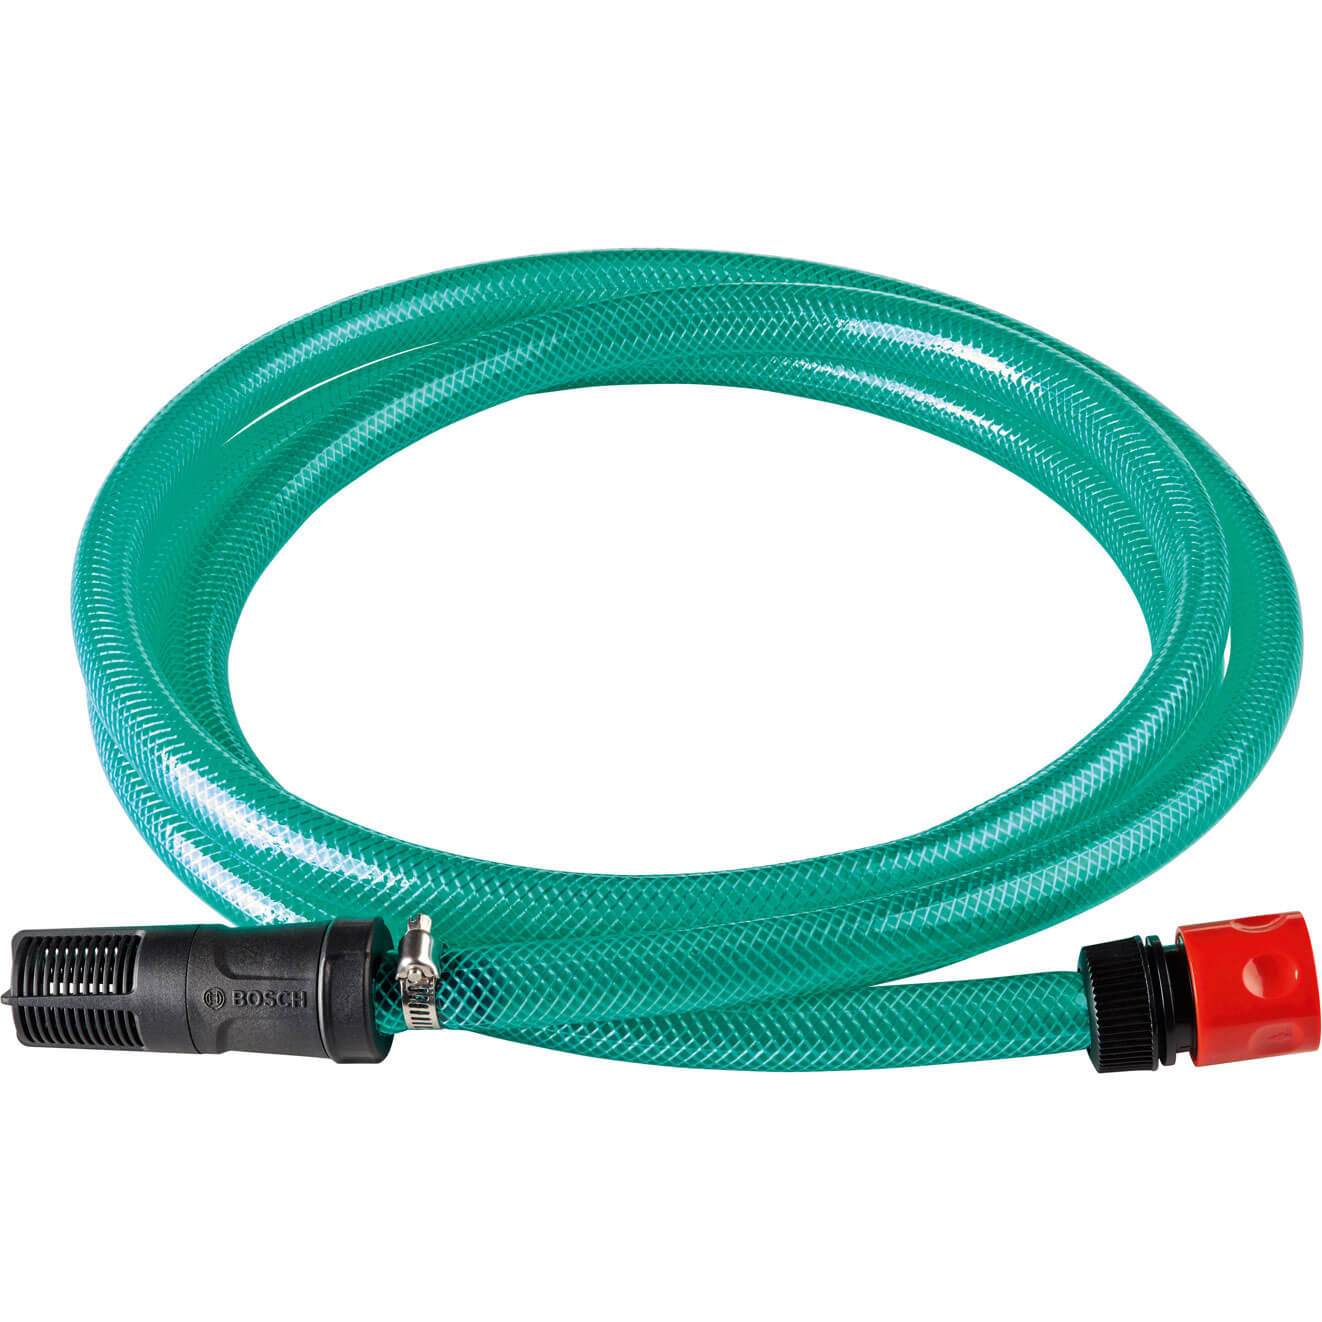 Bosch Self Priming Suction Hose with Filter for Water Butts & Ponds for AQT Pressure Washers